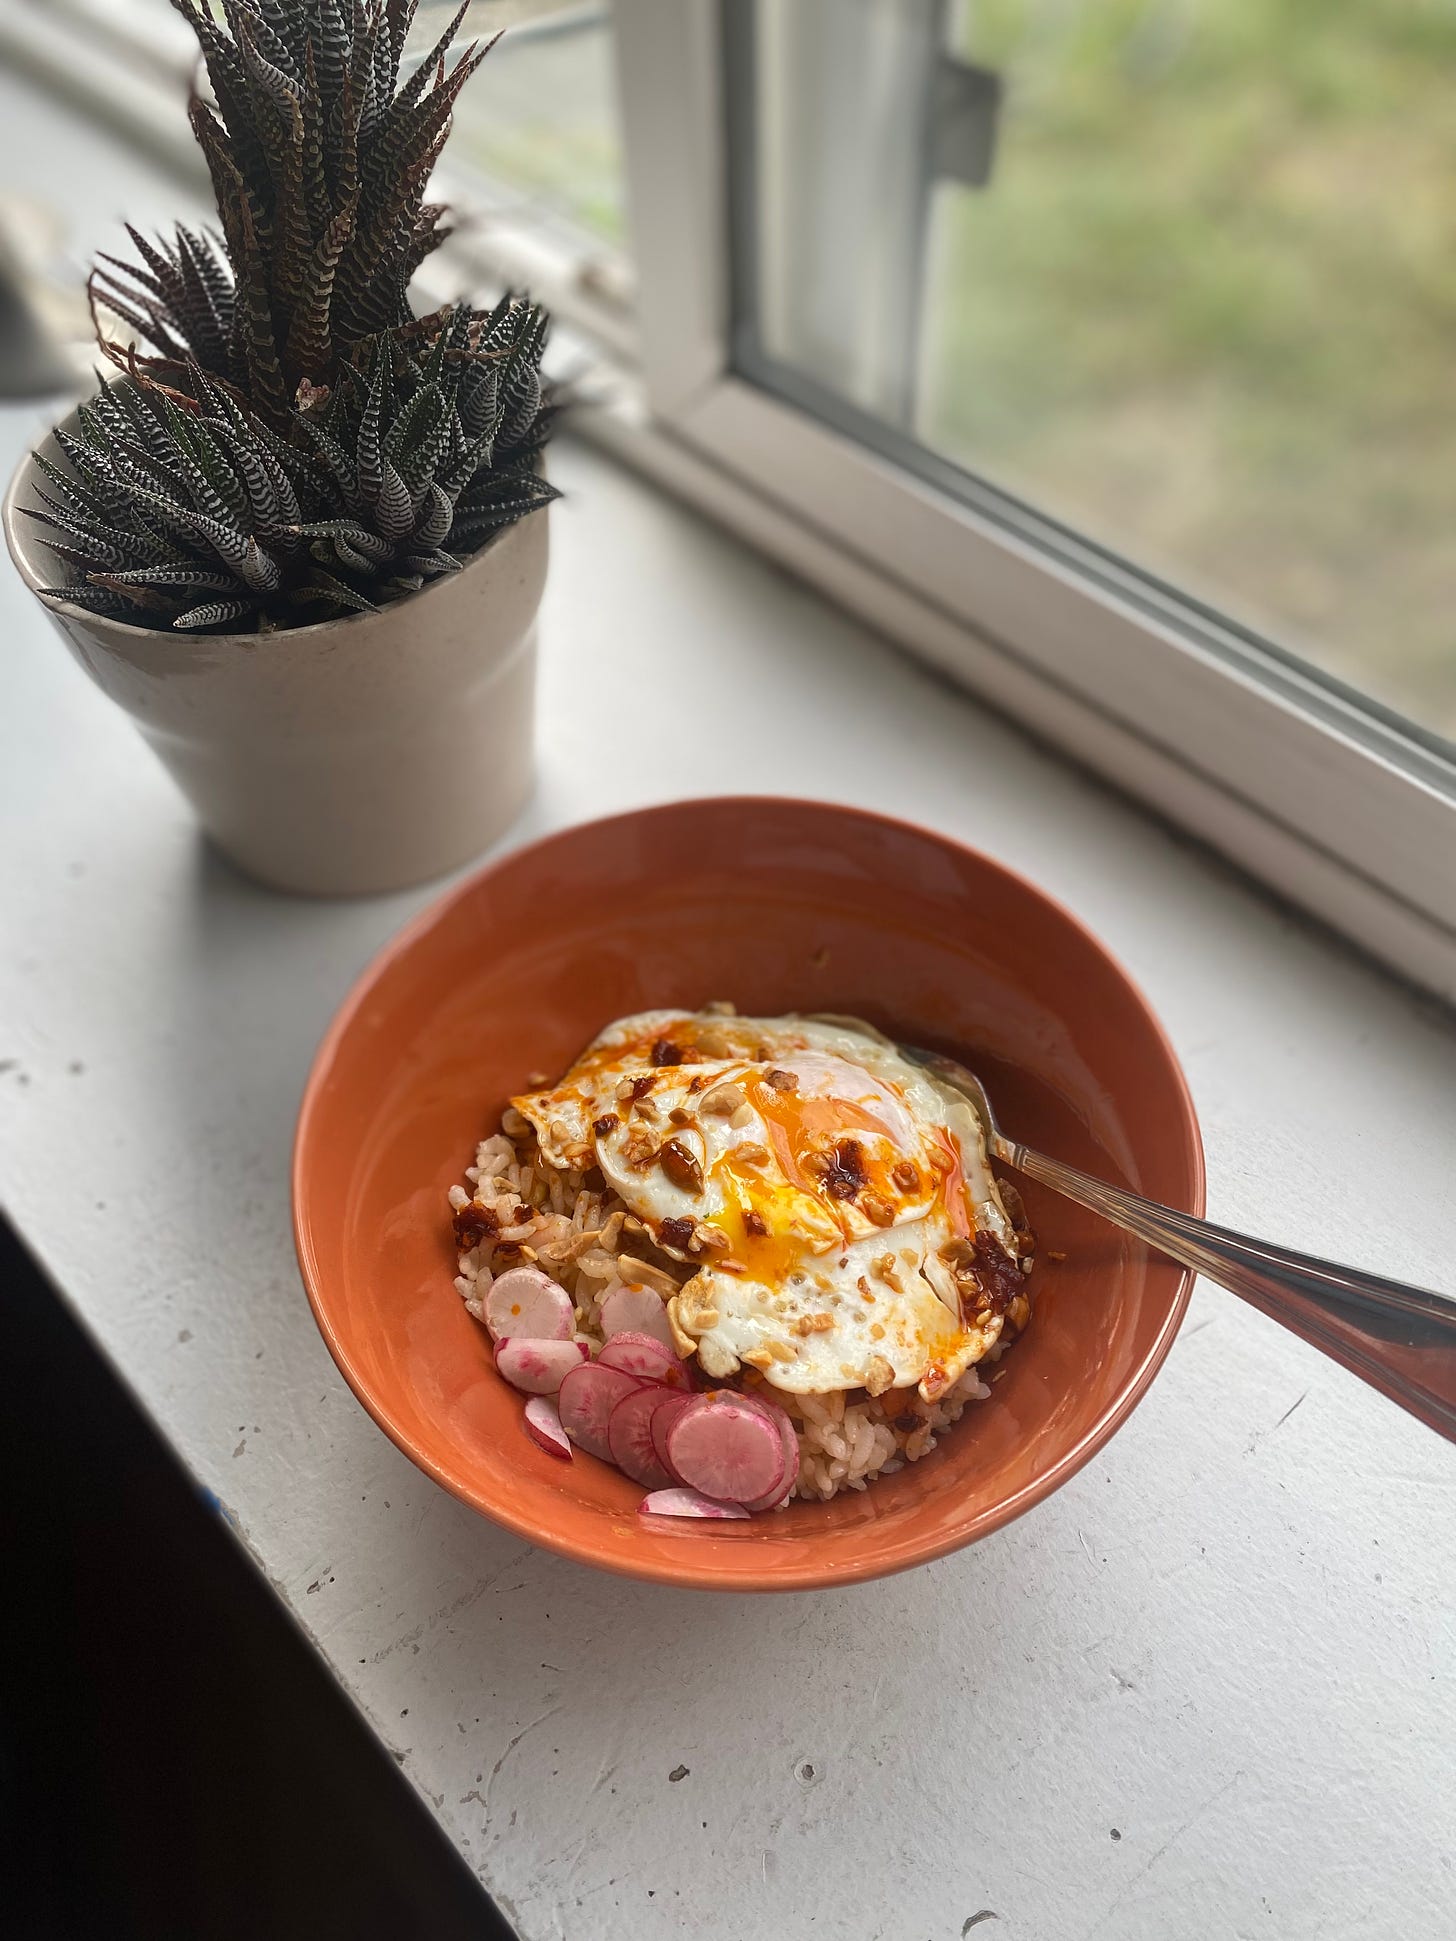 An orange bowl of fried rice with a fried egg on top, yolk broken open. The egg is garnished with chili crisp and peanuts, and thin slices of radish.